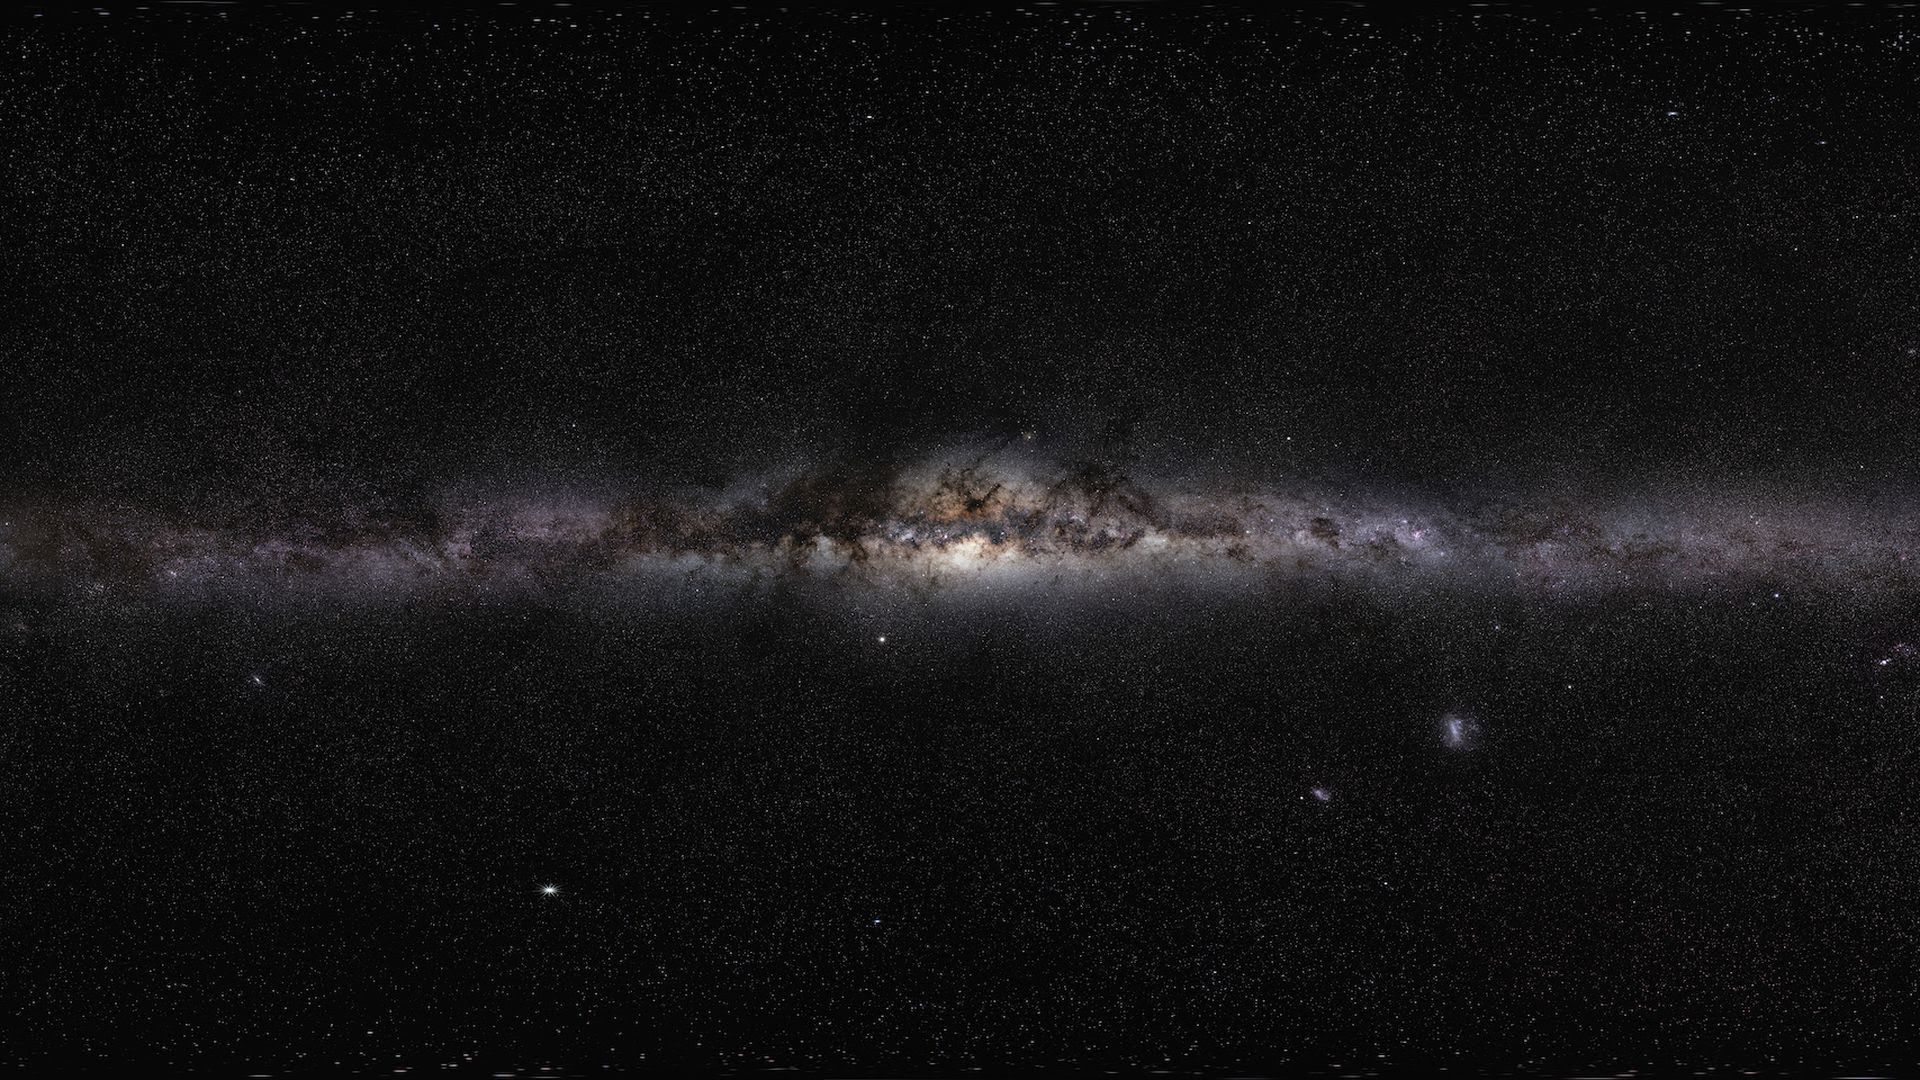 The clouds of the Milky Way. Photo: ESO/S. Brunier